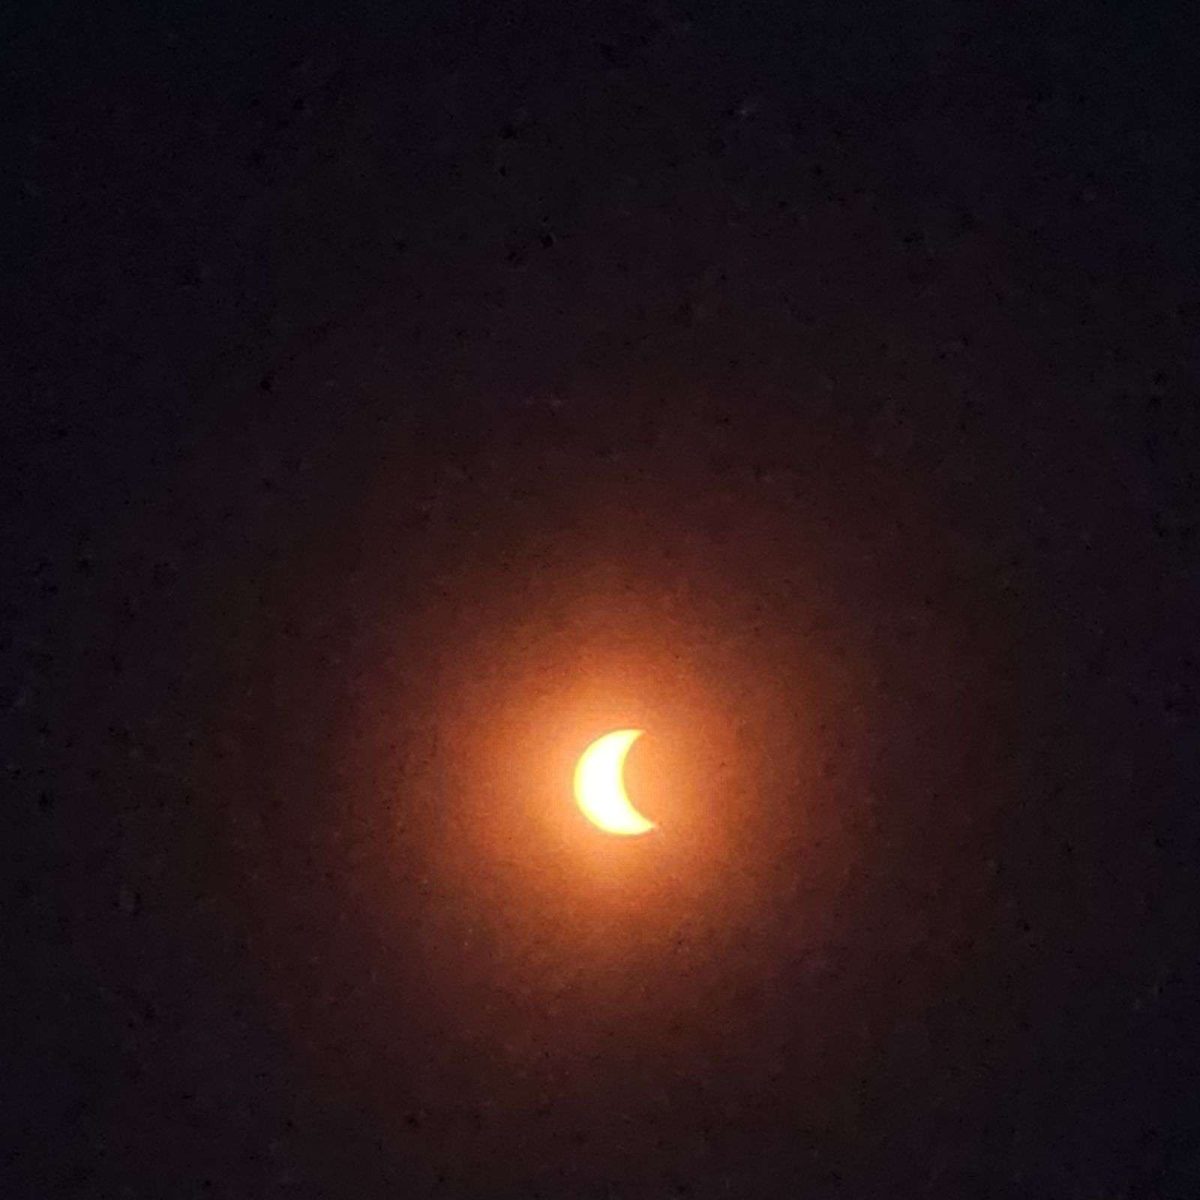 The Solar Eclipse at 1:20 p.m. in Clarkson, AR.